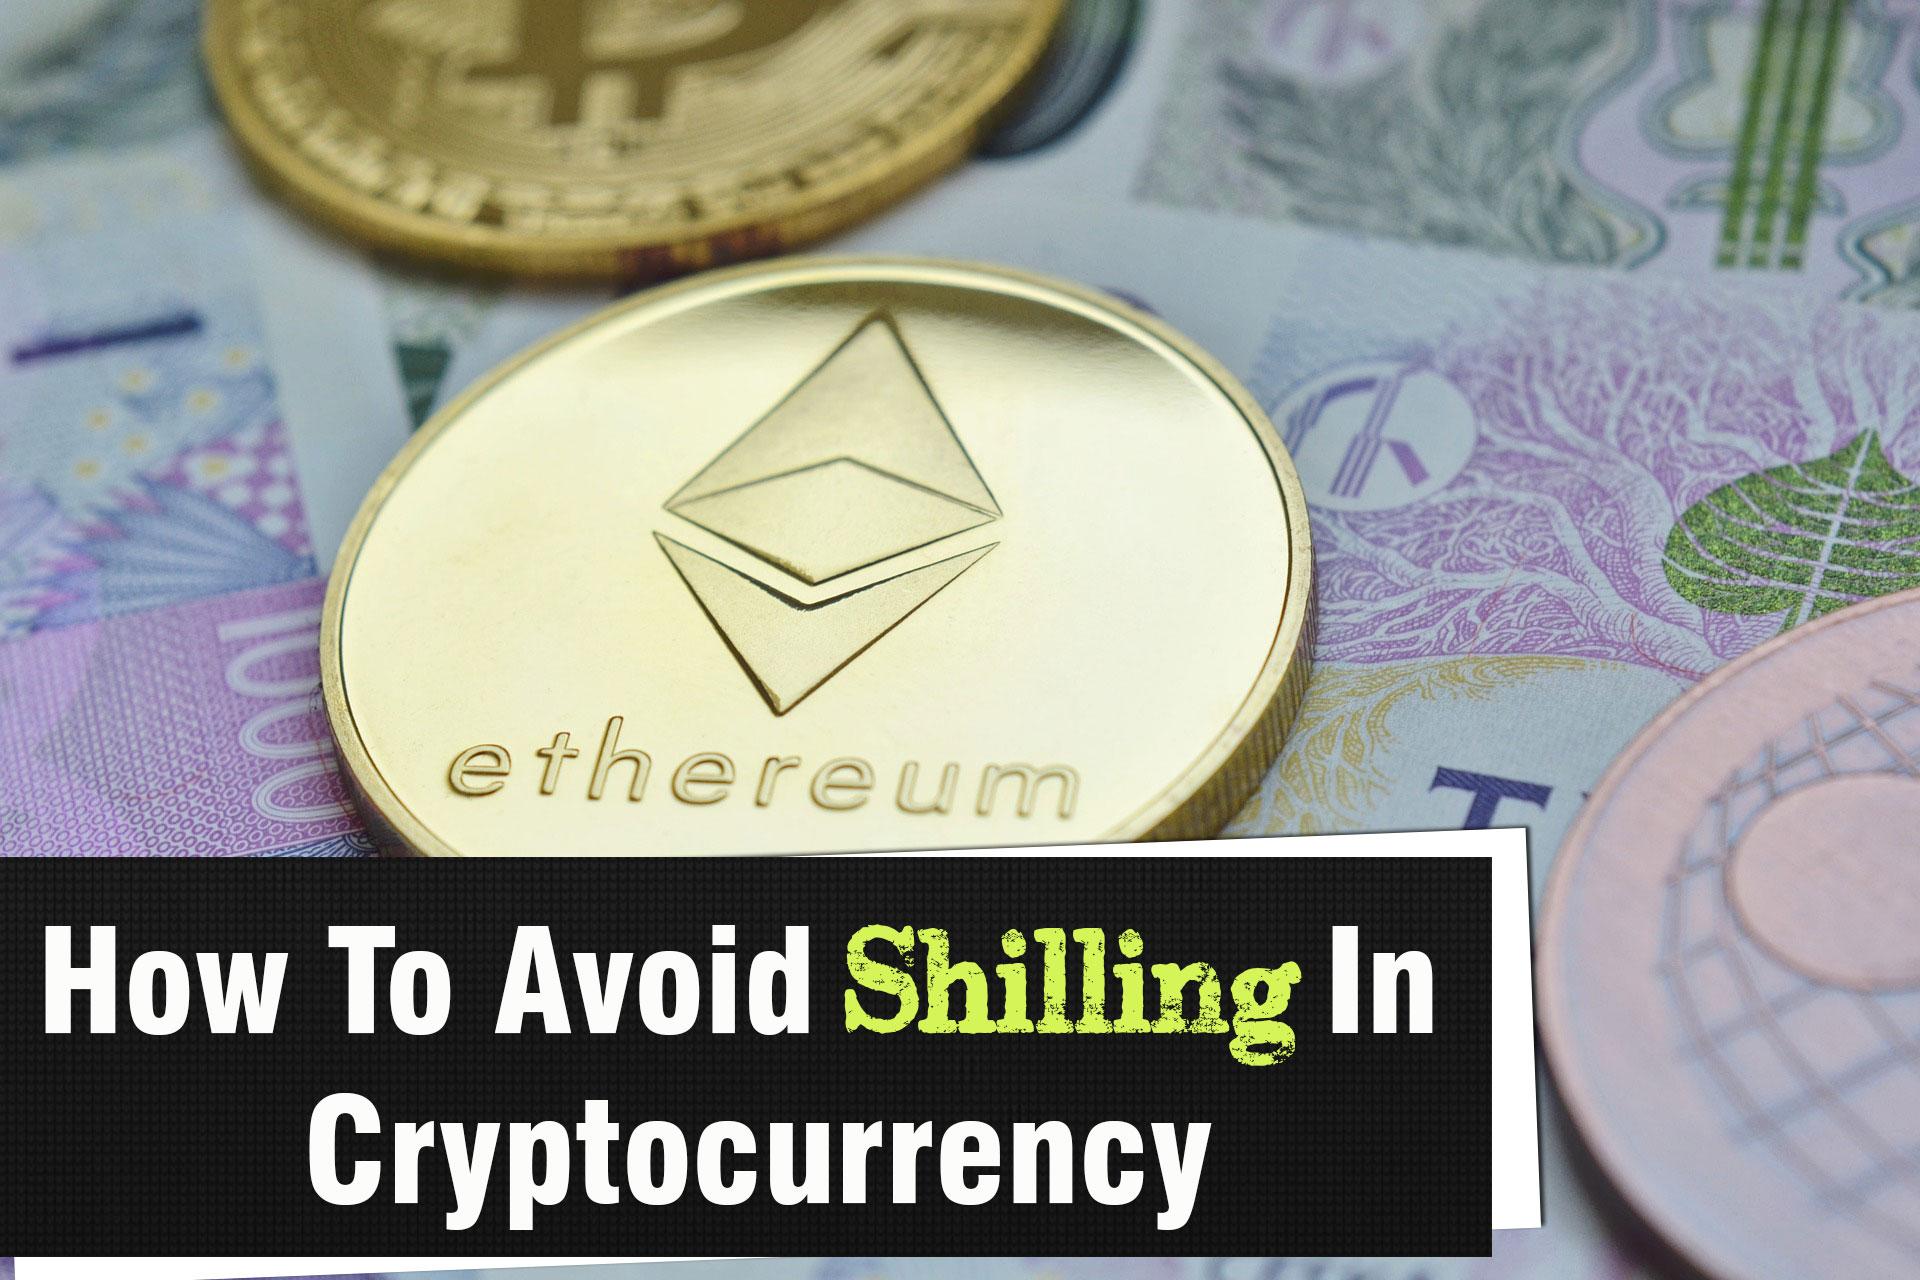 How To Spot And Avoid Shilling In Cryptocurrency